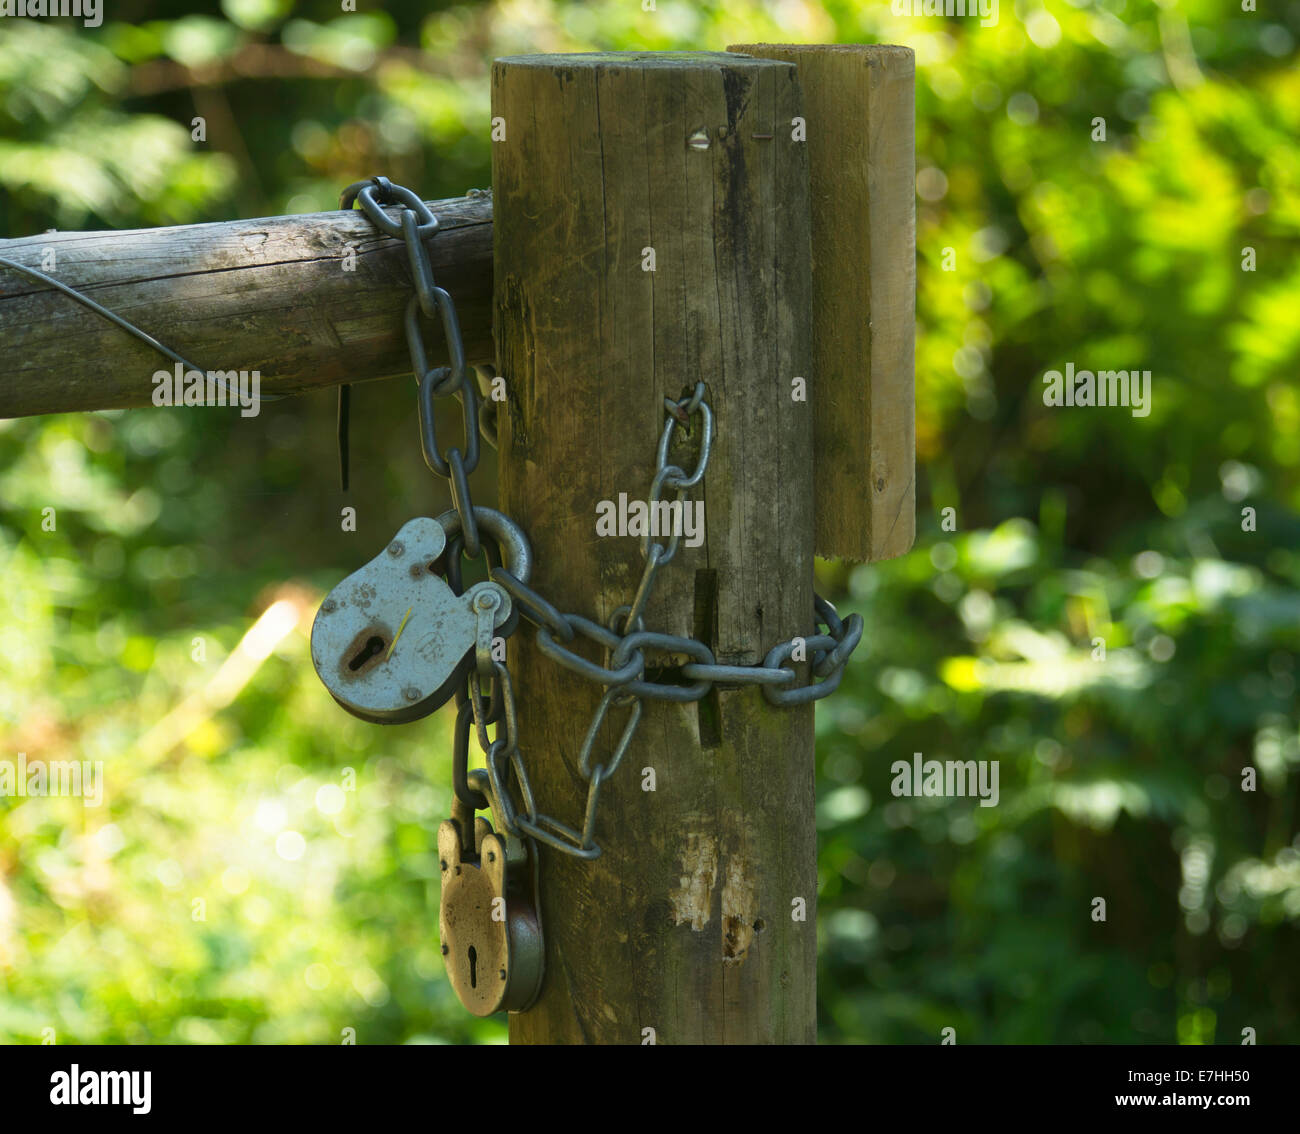 Padlocks and chains on wooden gate with green foliage in background Stock Photo